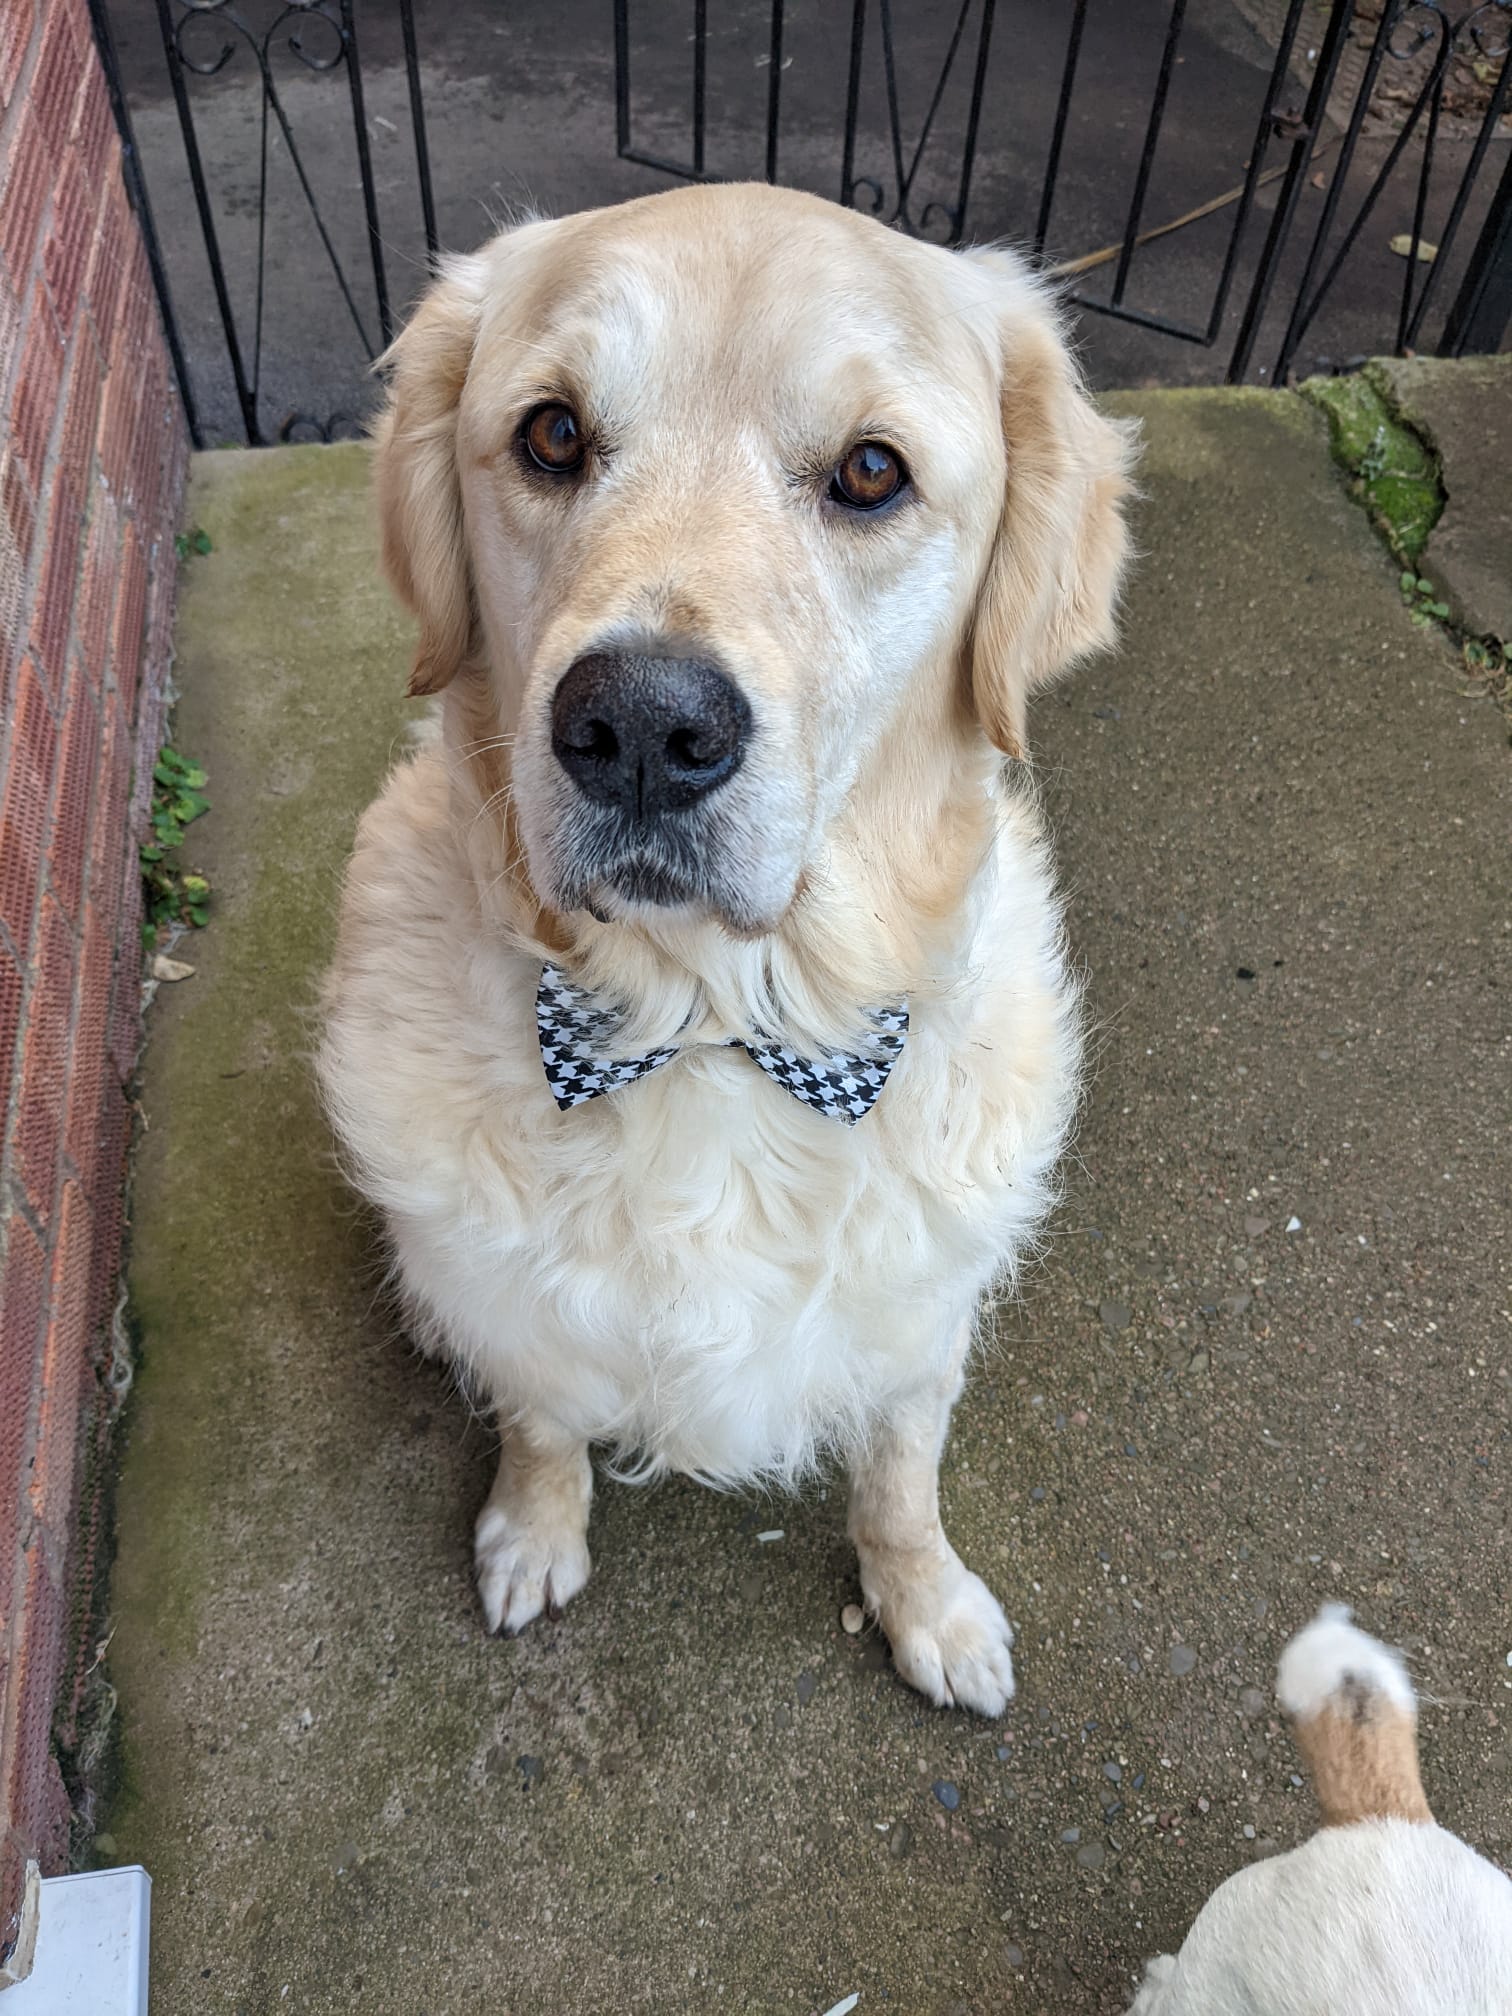 Hereford Times: Buddy trying to impress with his bow tie